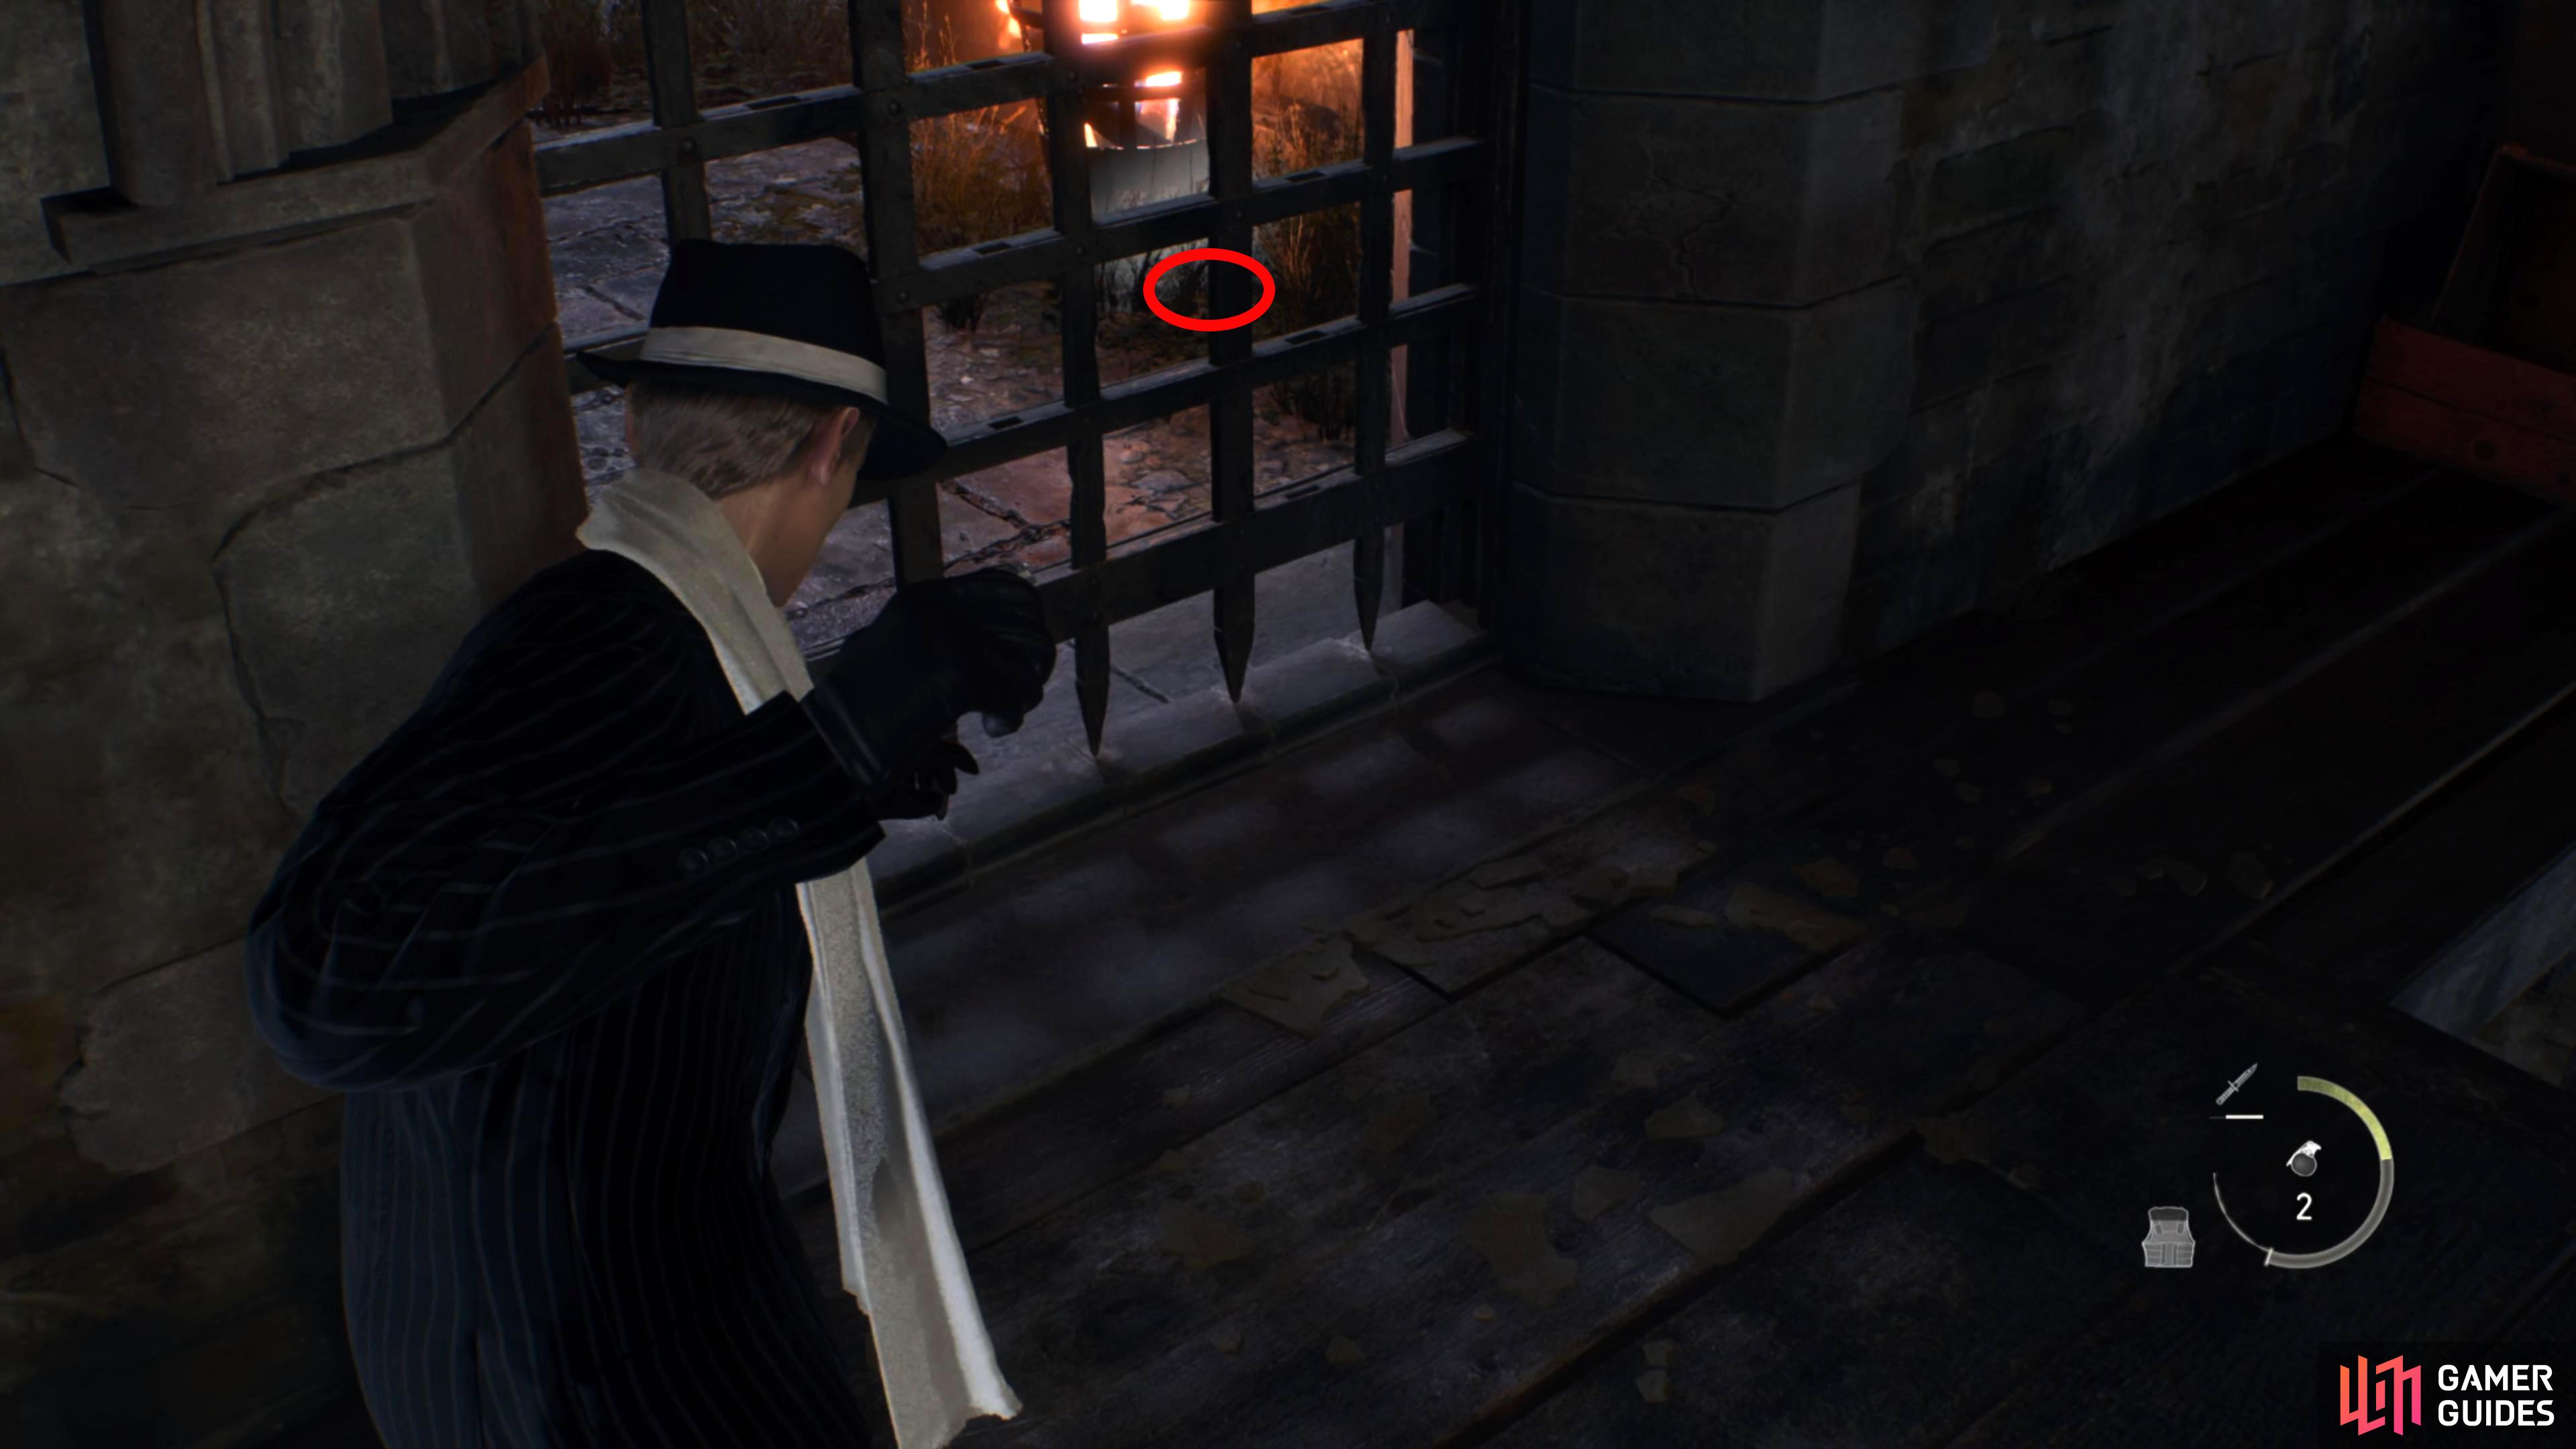 On the first gate, aim the grenade to land in front of the brazier.